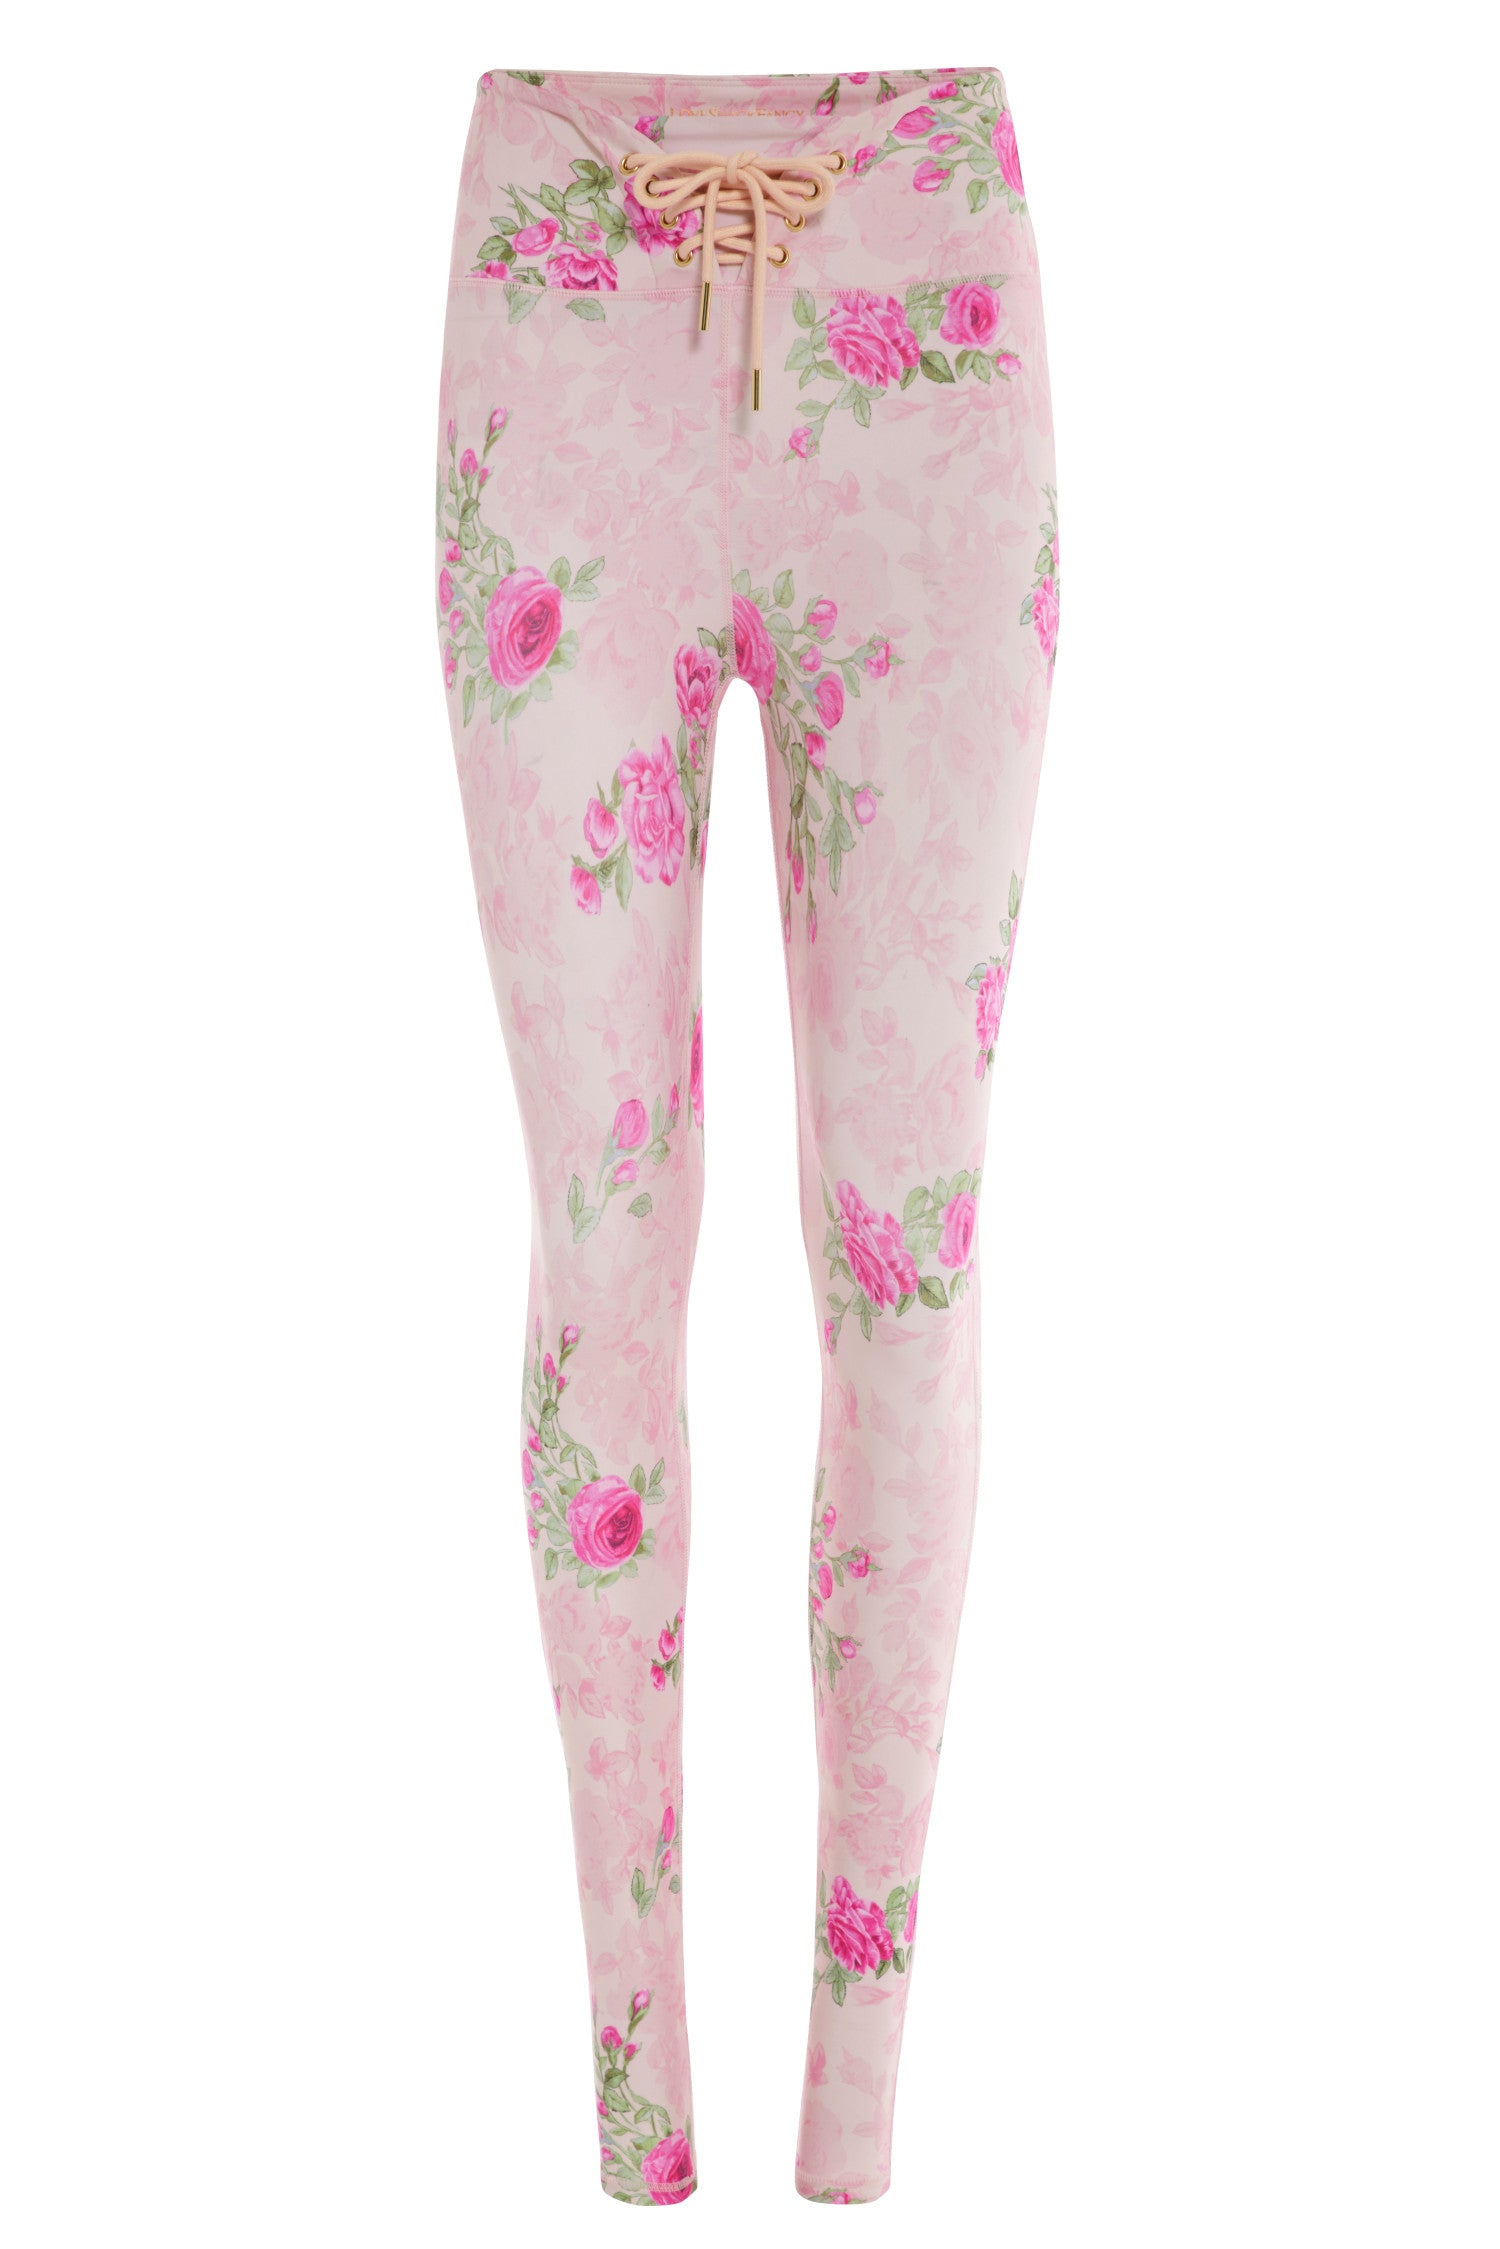 Postiana Pink Floral Lace Up Legging - Women's Activewear